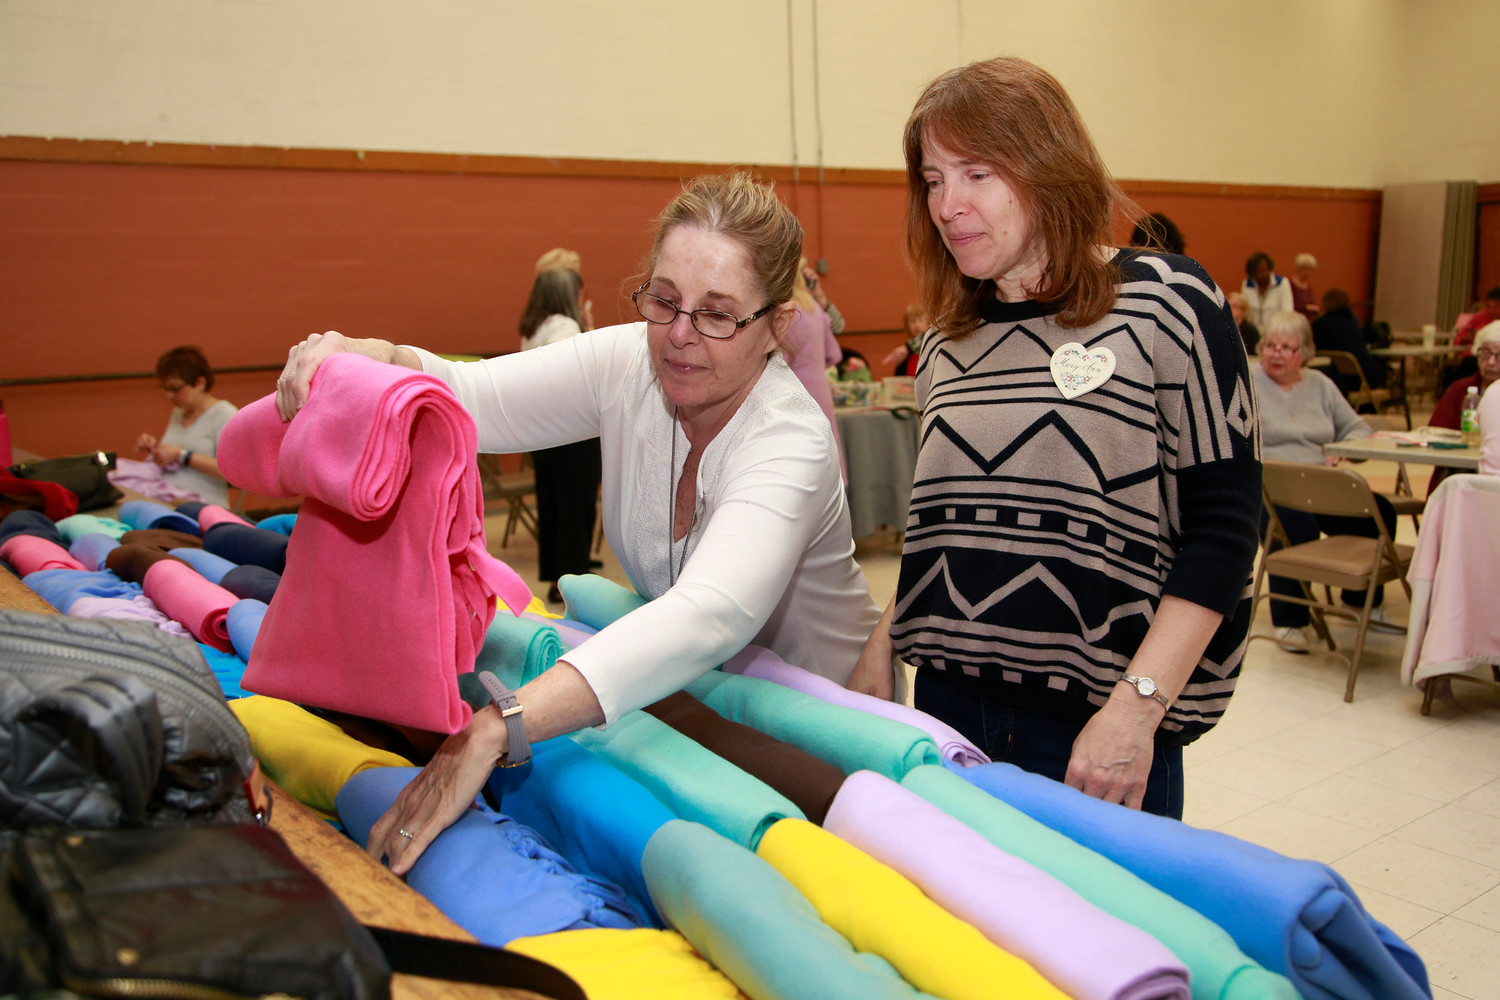 Marilyn Jurgensen and Mary Ann Grandazza arranged the blankets in a colorful way.